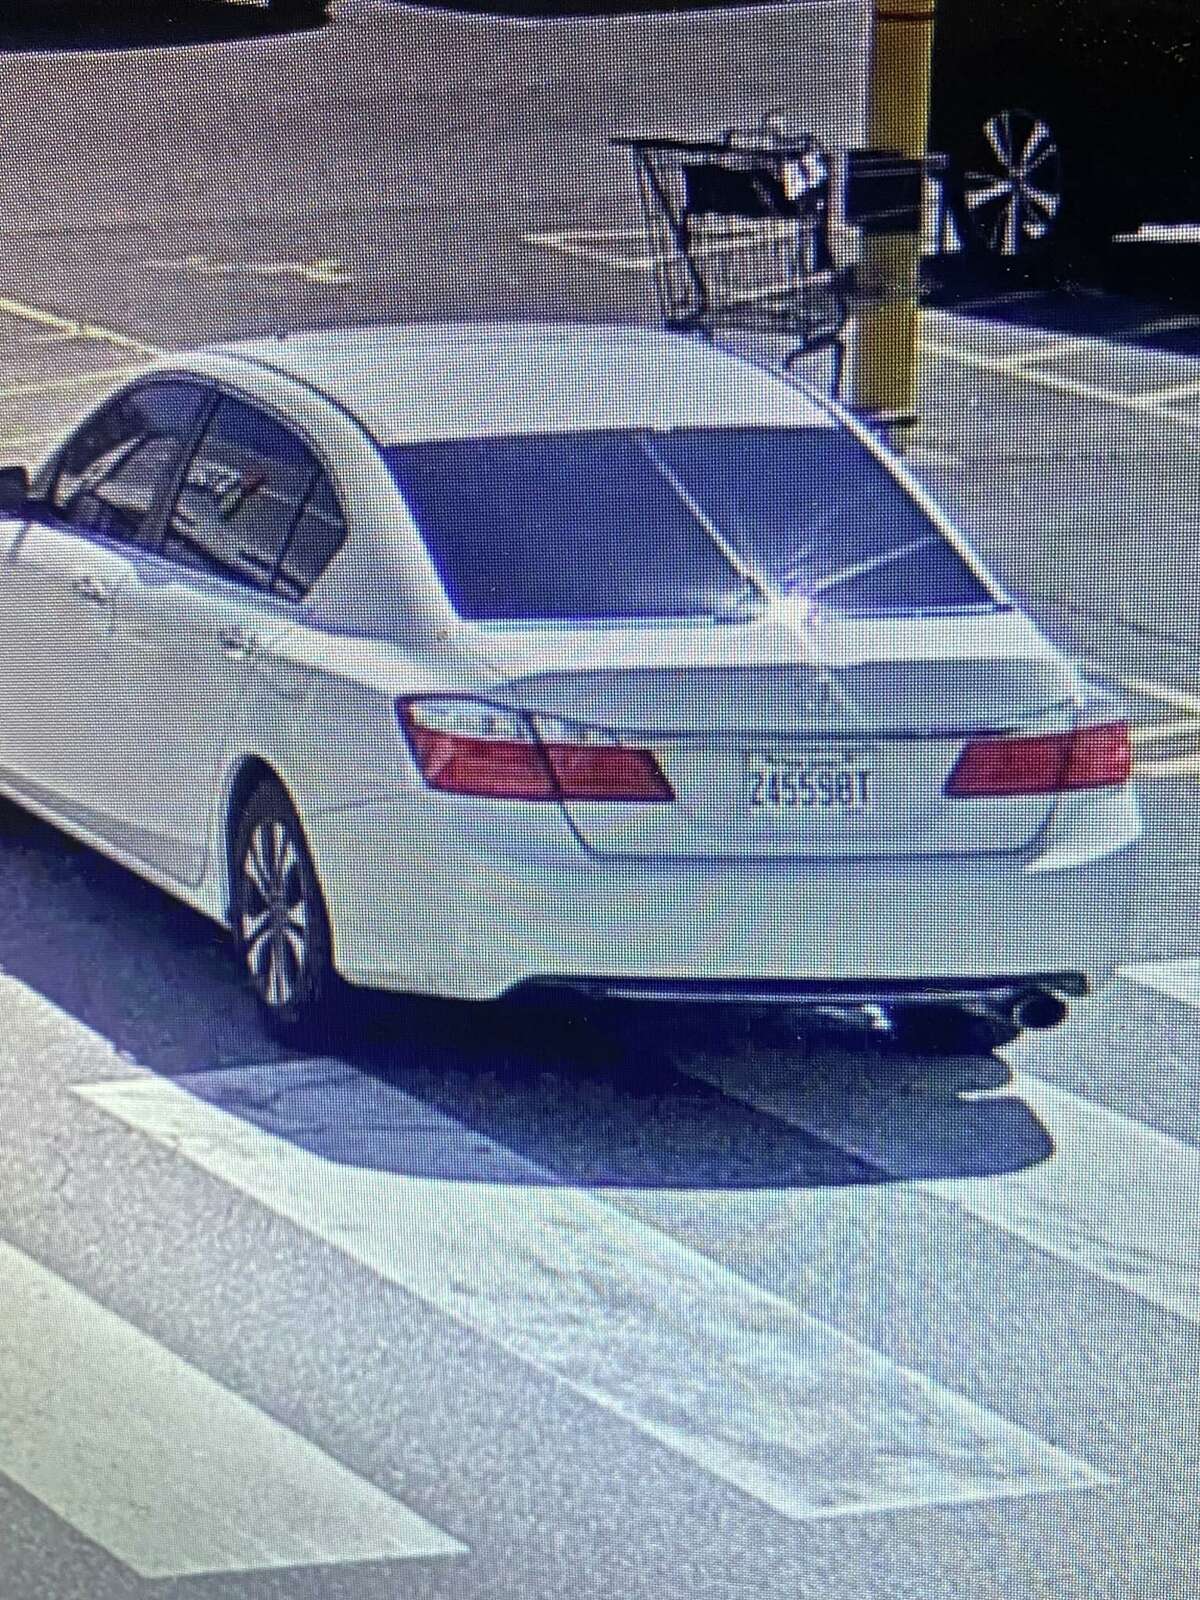 Police are investigating three purse thefts that took place in store parking lots. Police said the suspect fled in this 2013 Honda Accord, which was reported stolen.